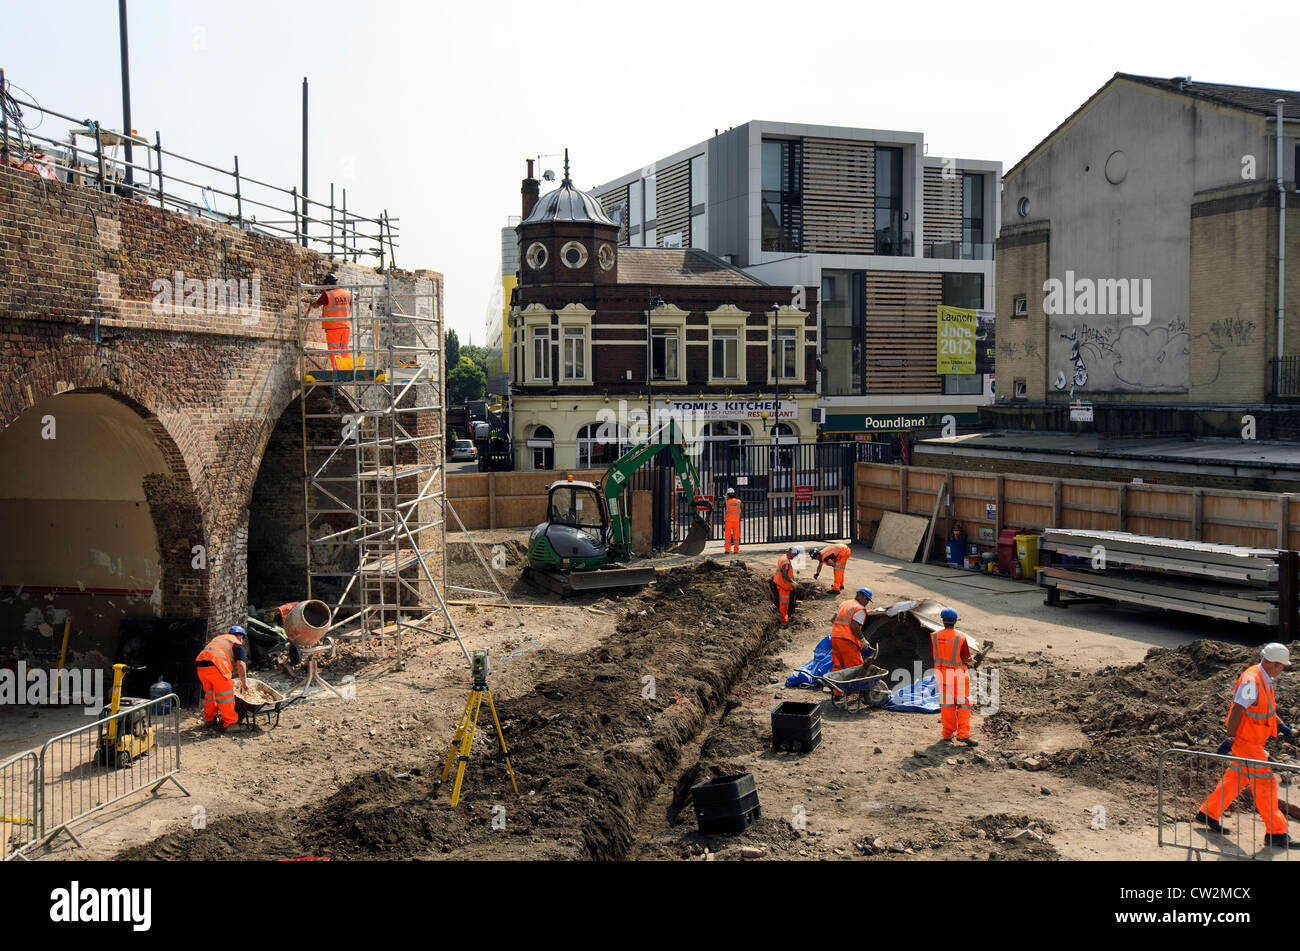 Building site at Deptford rail station - South East London, England Stock Photo